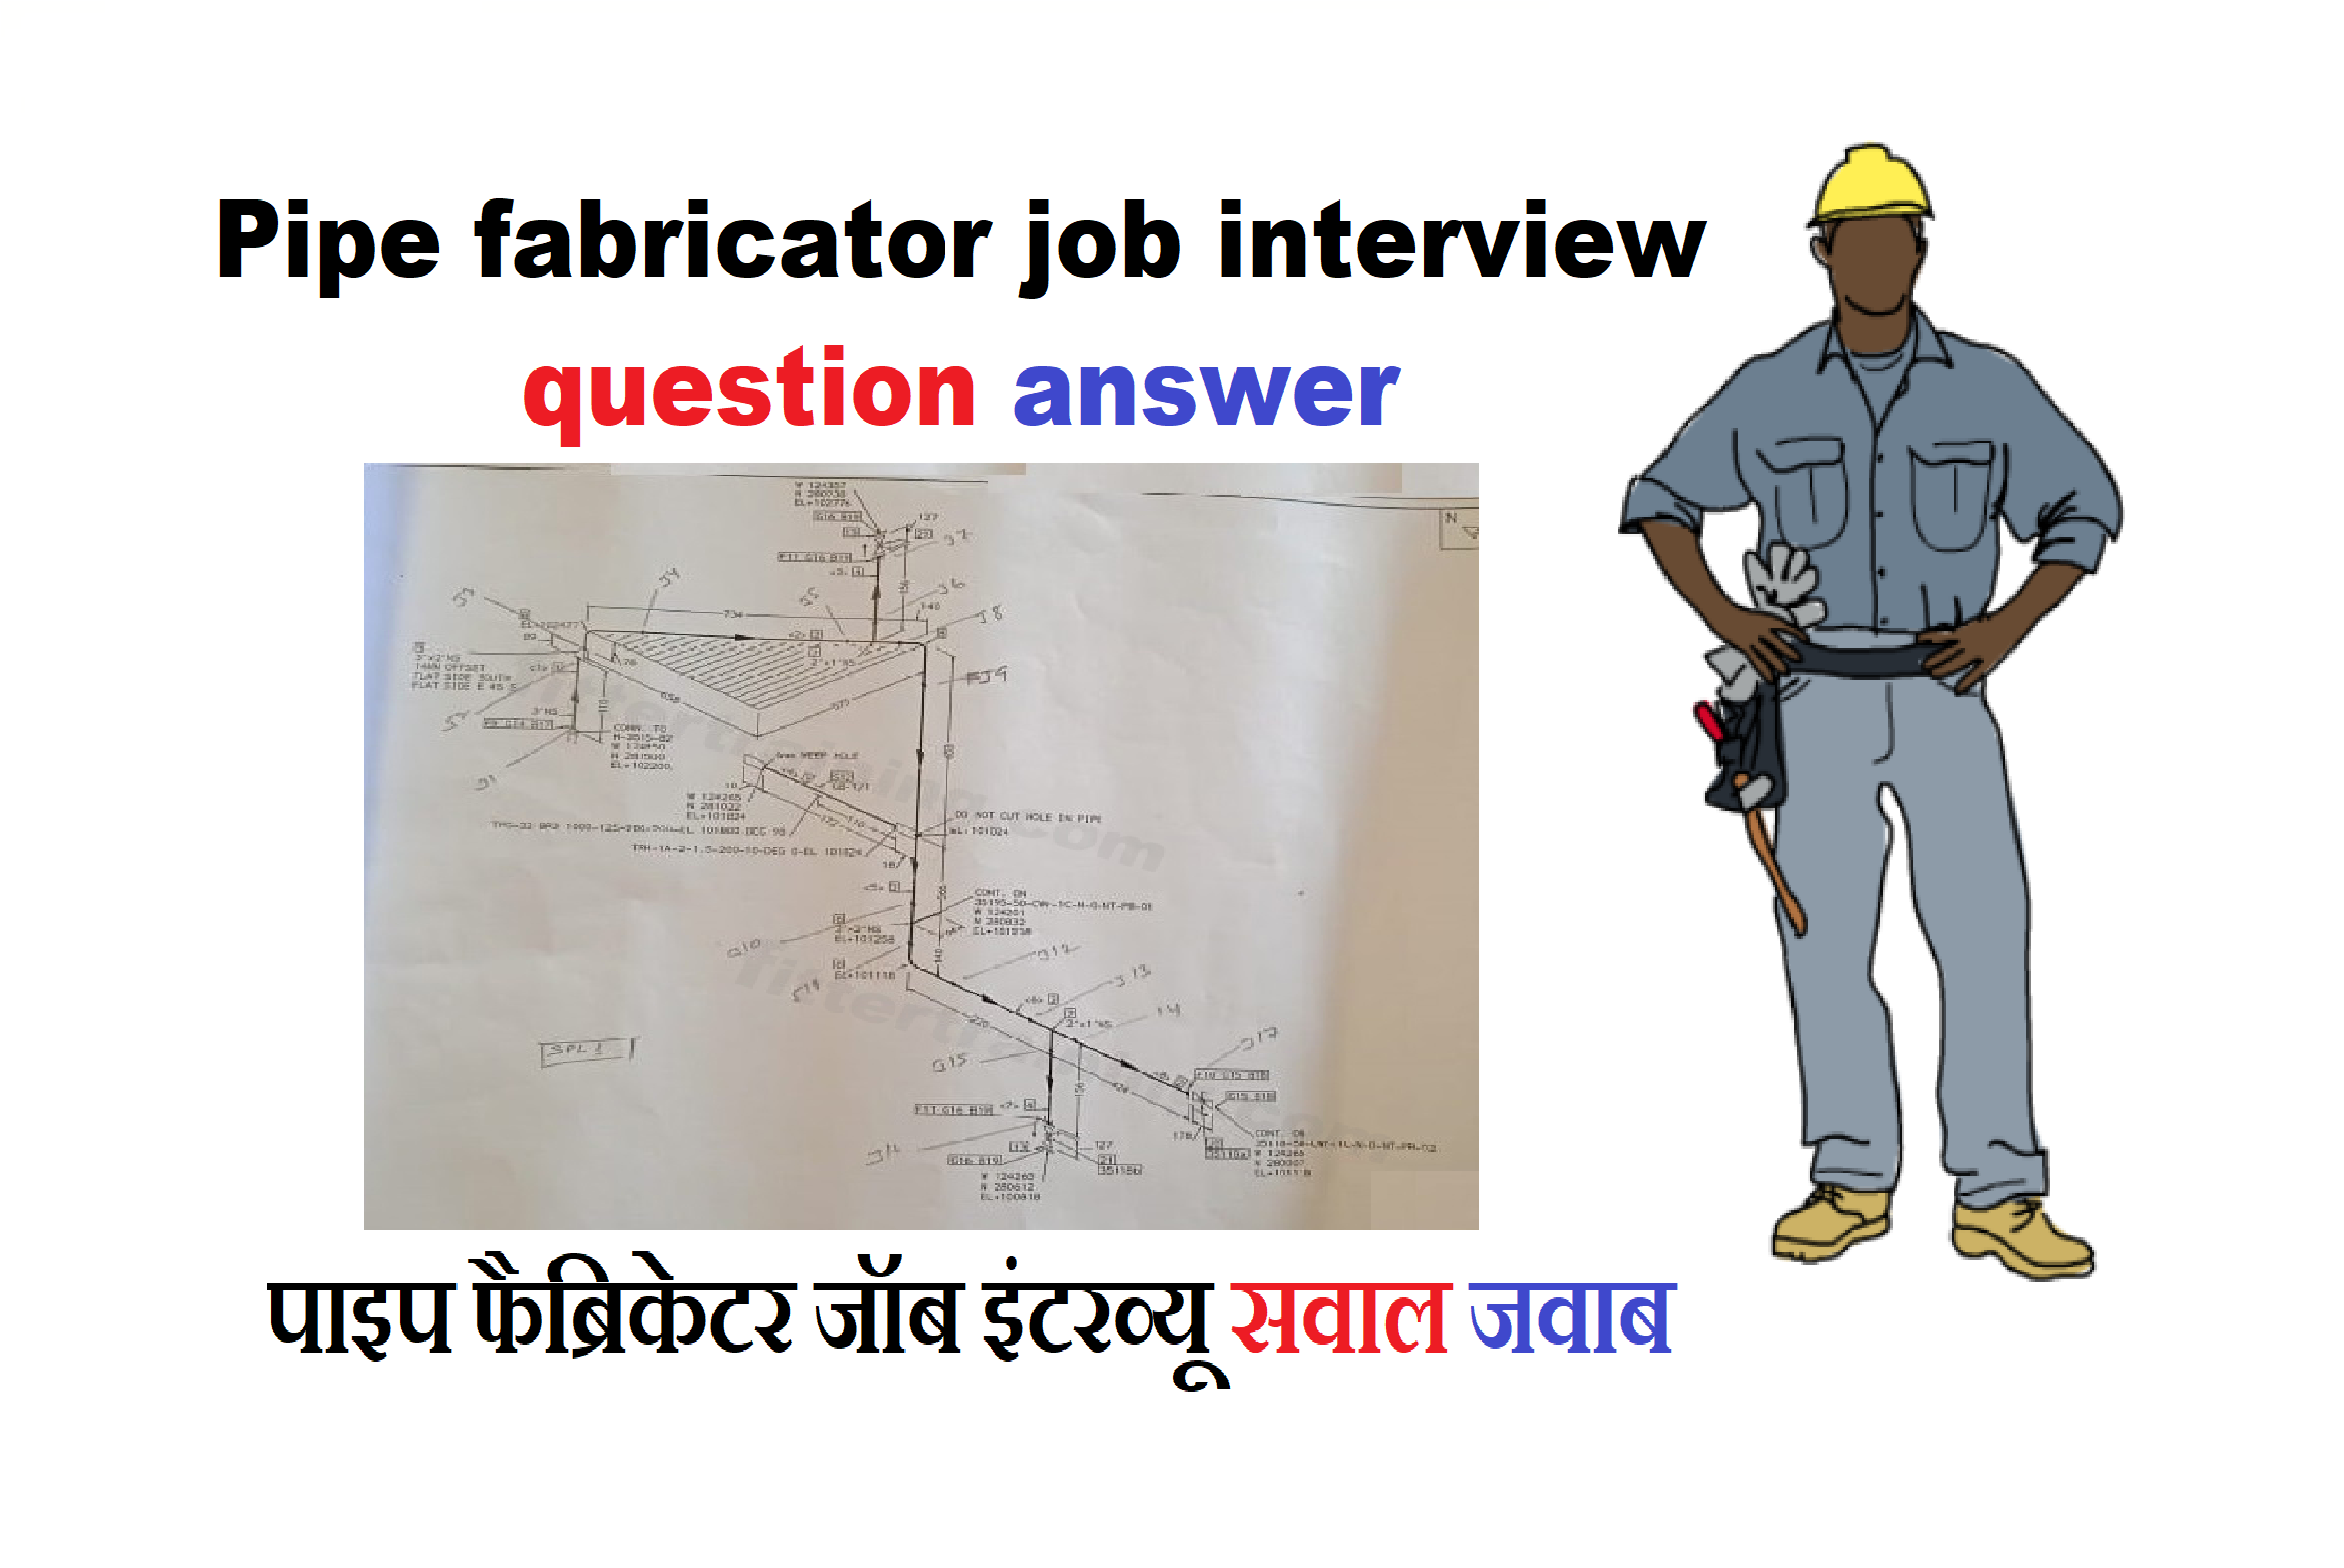 Pipe fabricator job interview question answer - Fitter training